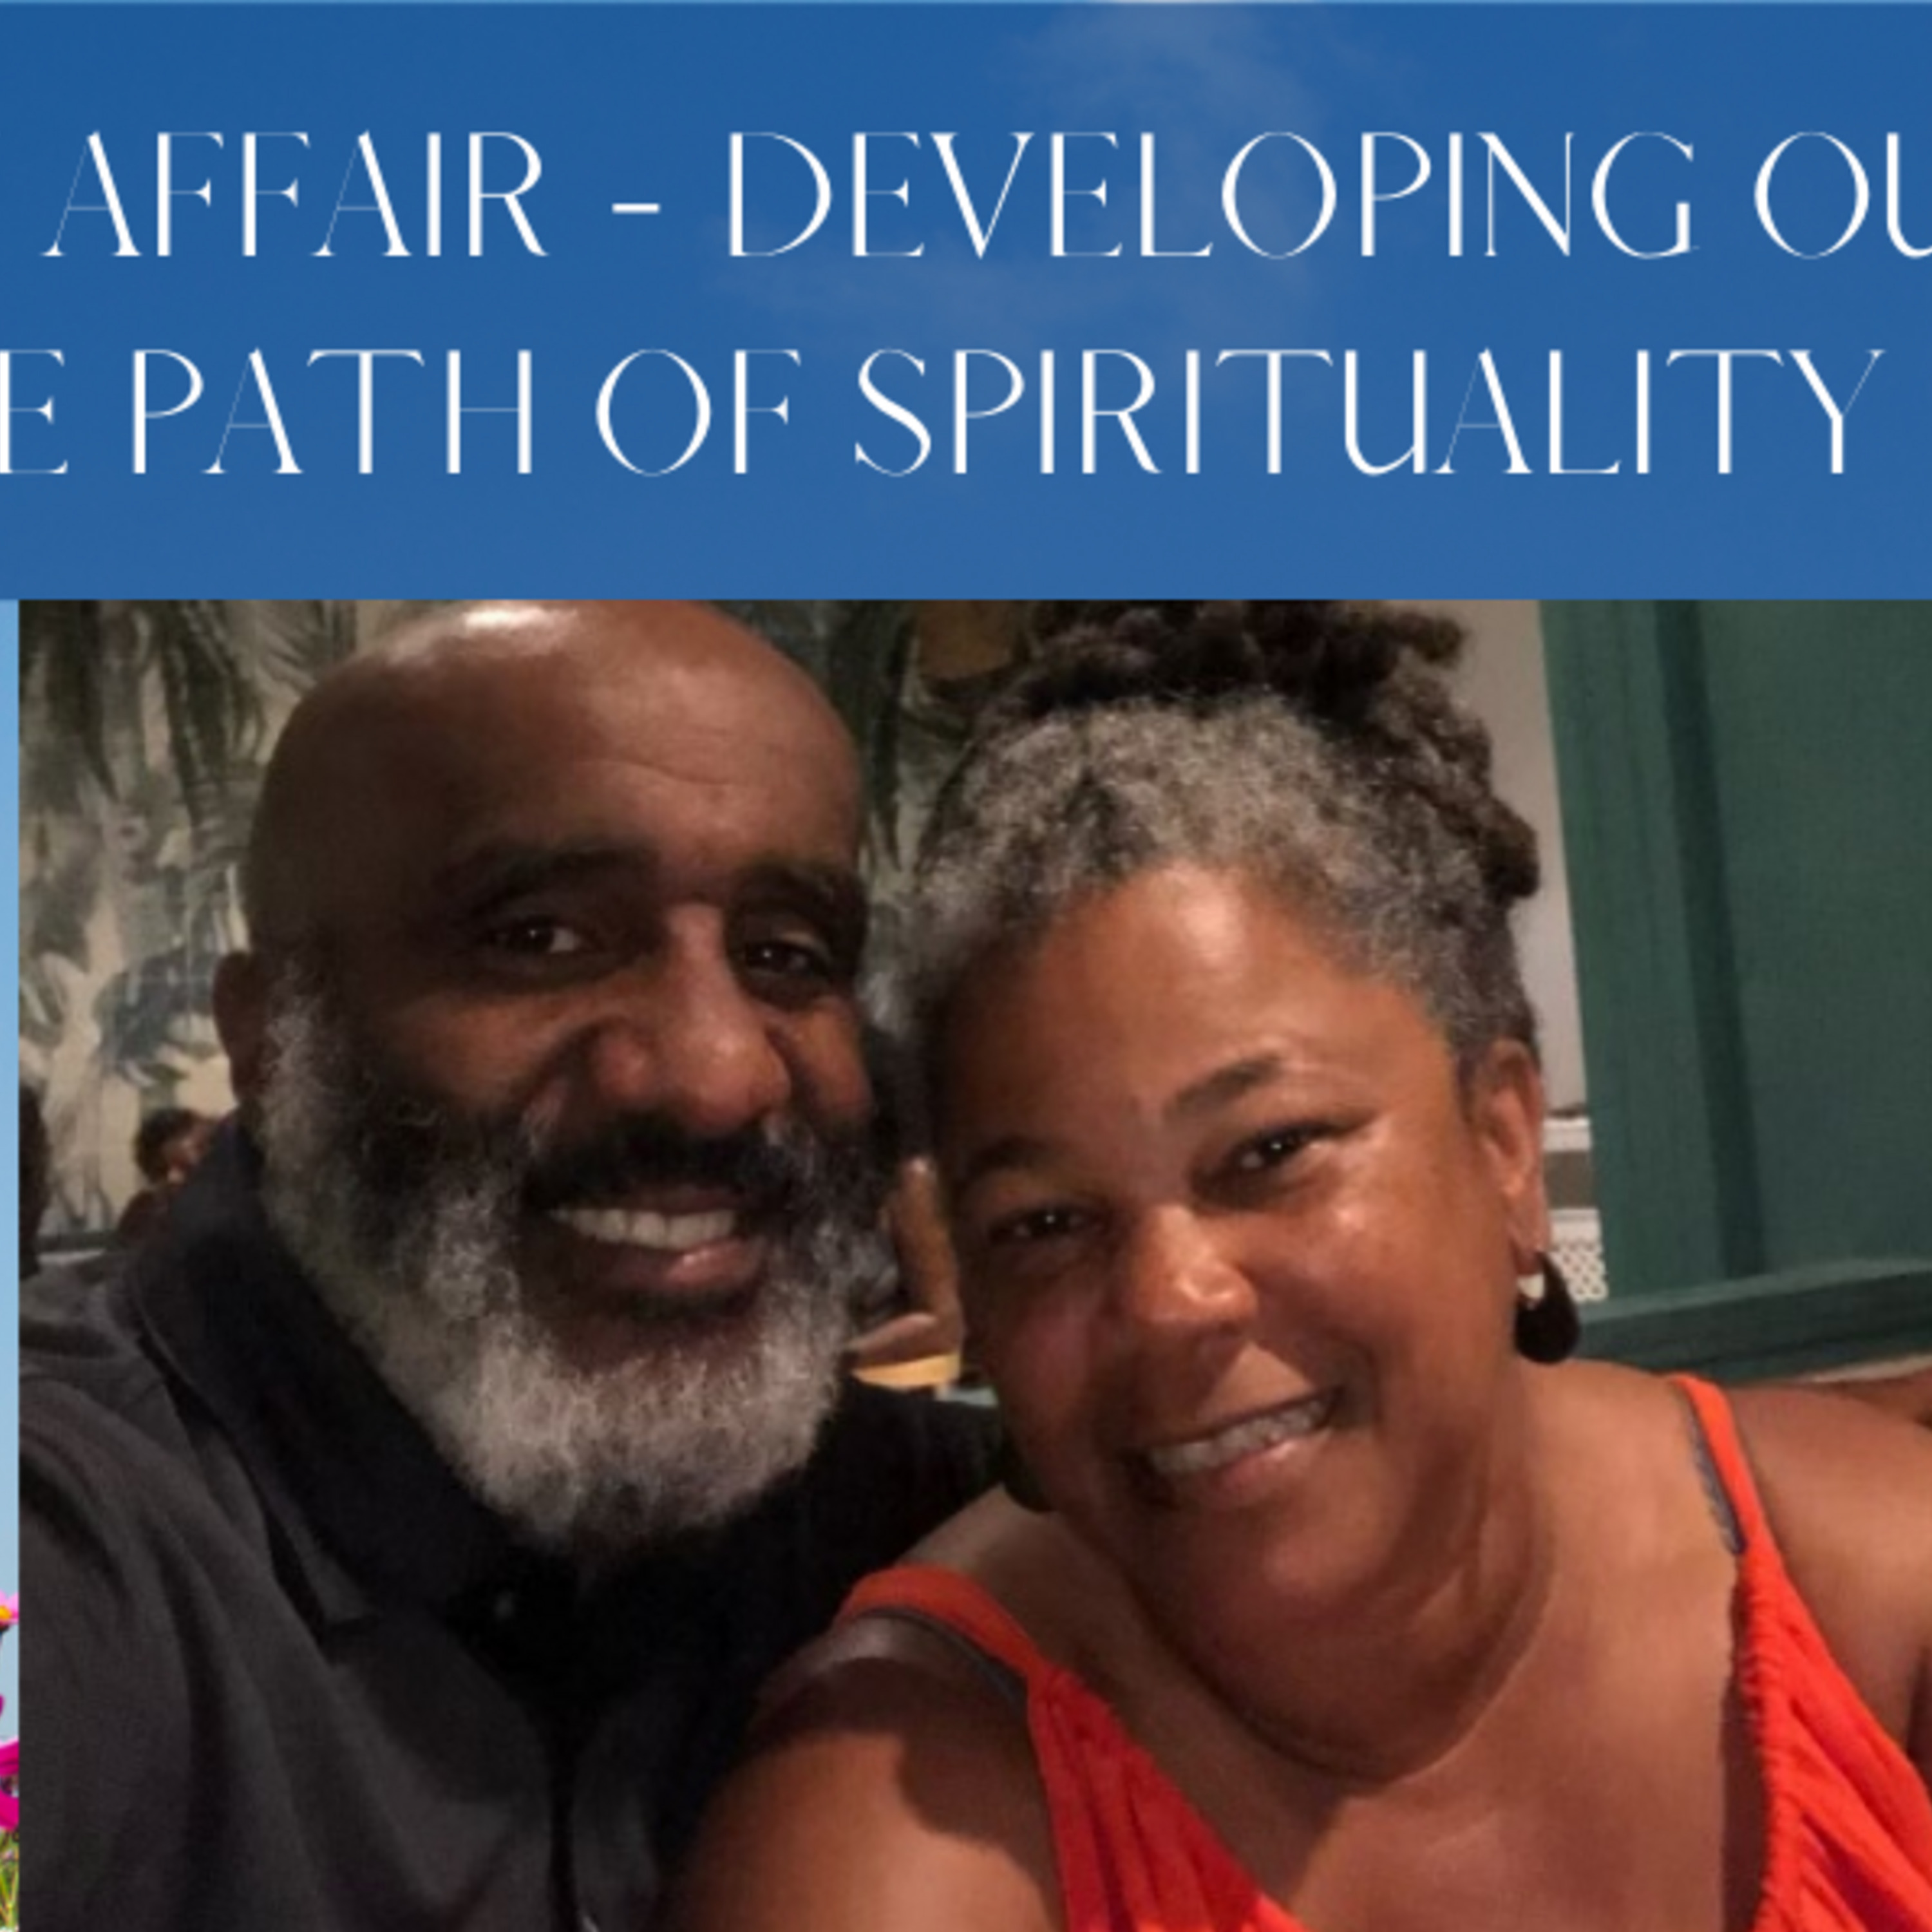 Episode 41: Its a Family Affair - Developing our children on the path of spirituality Part II